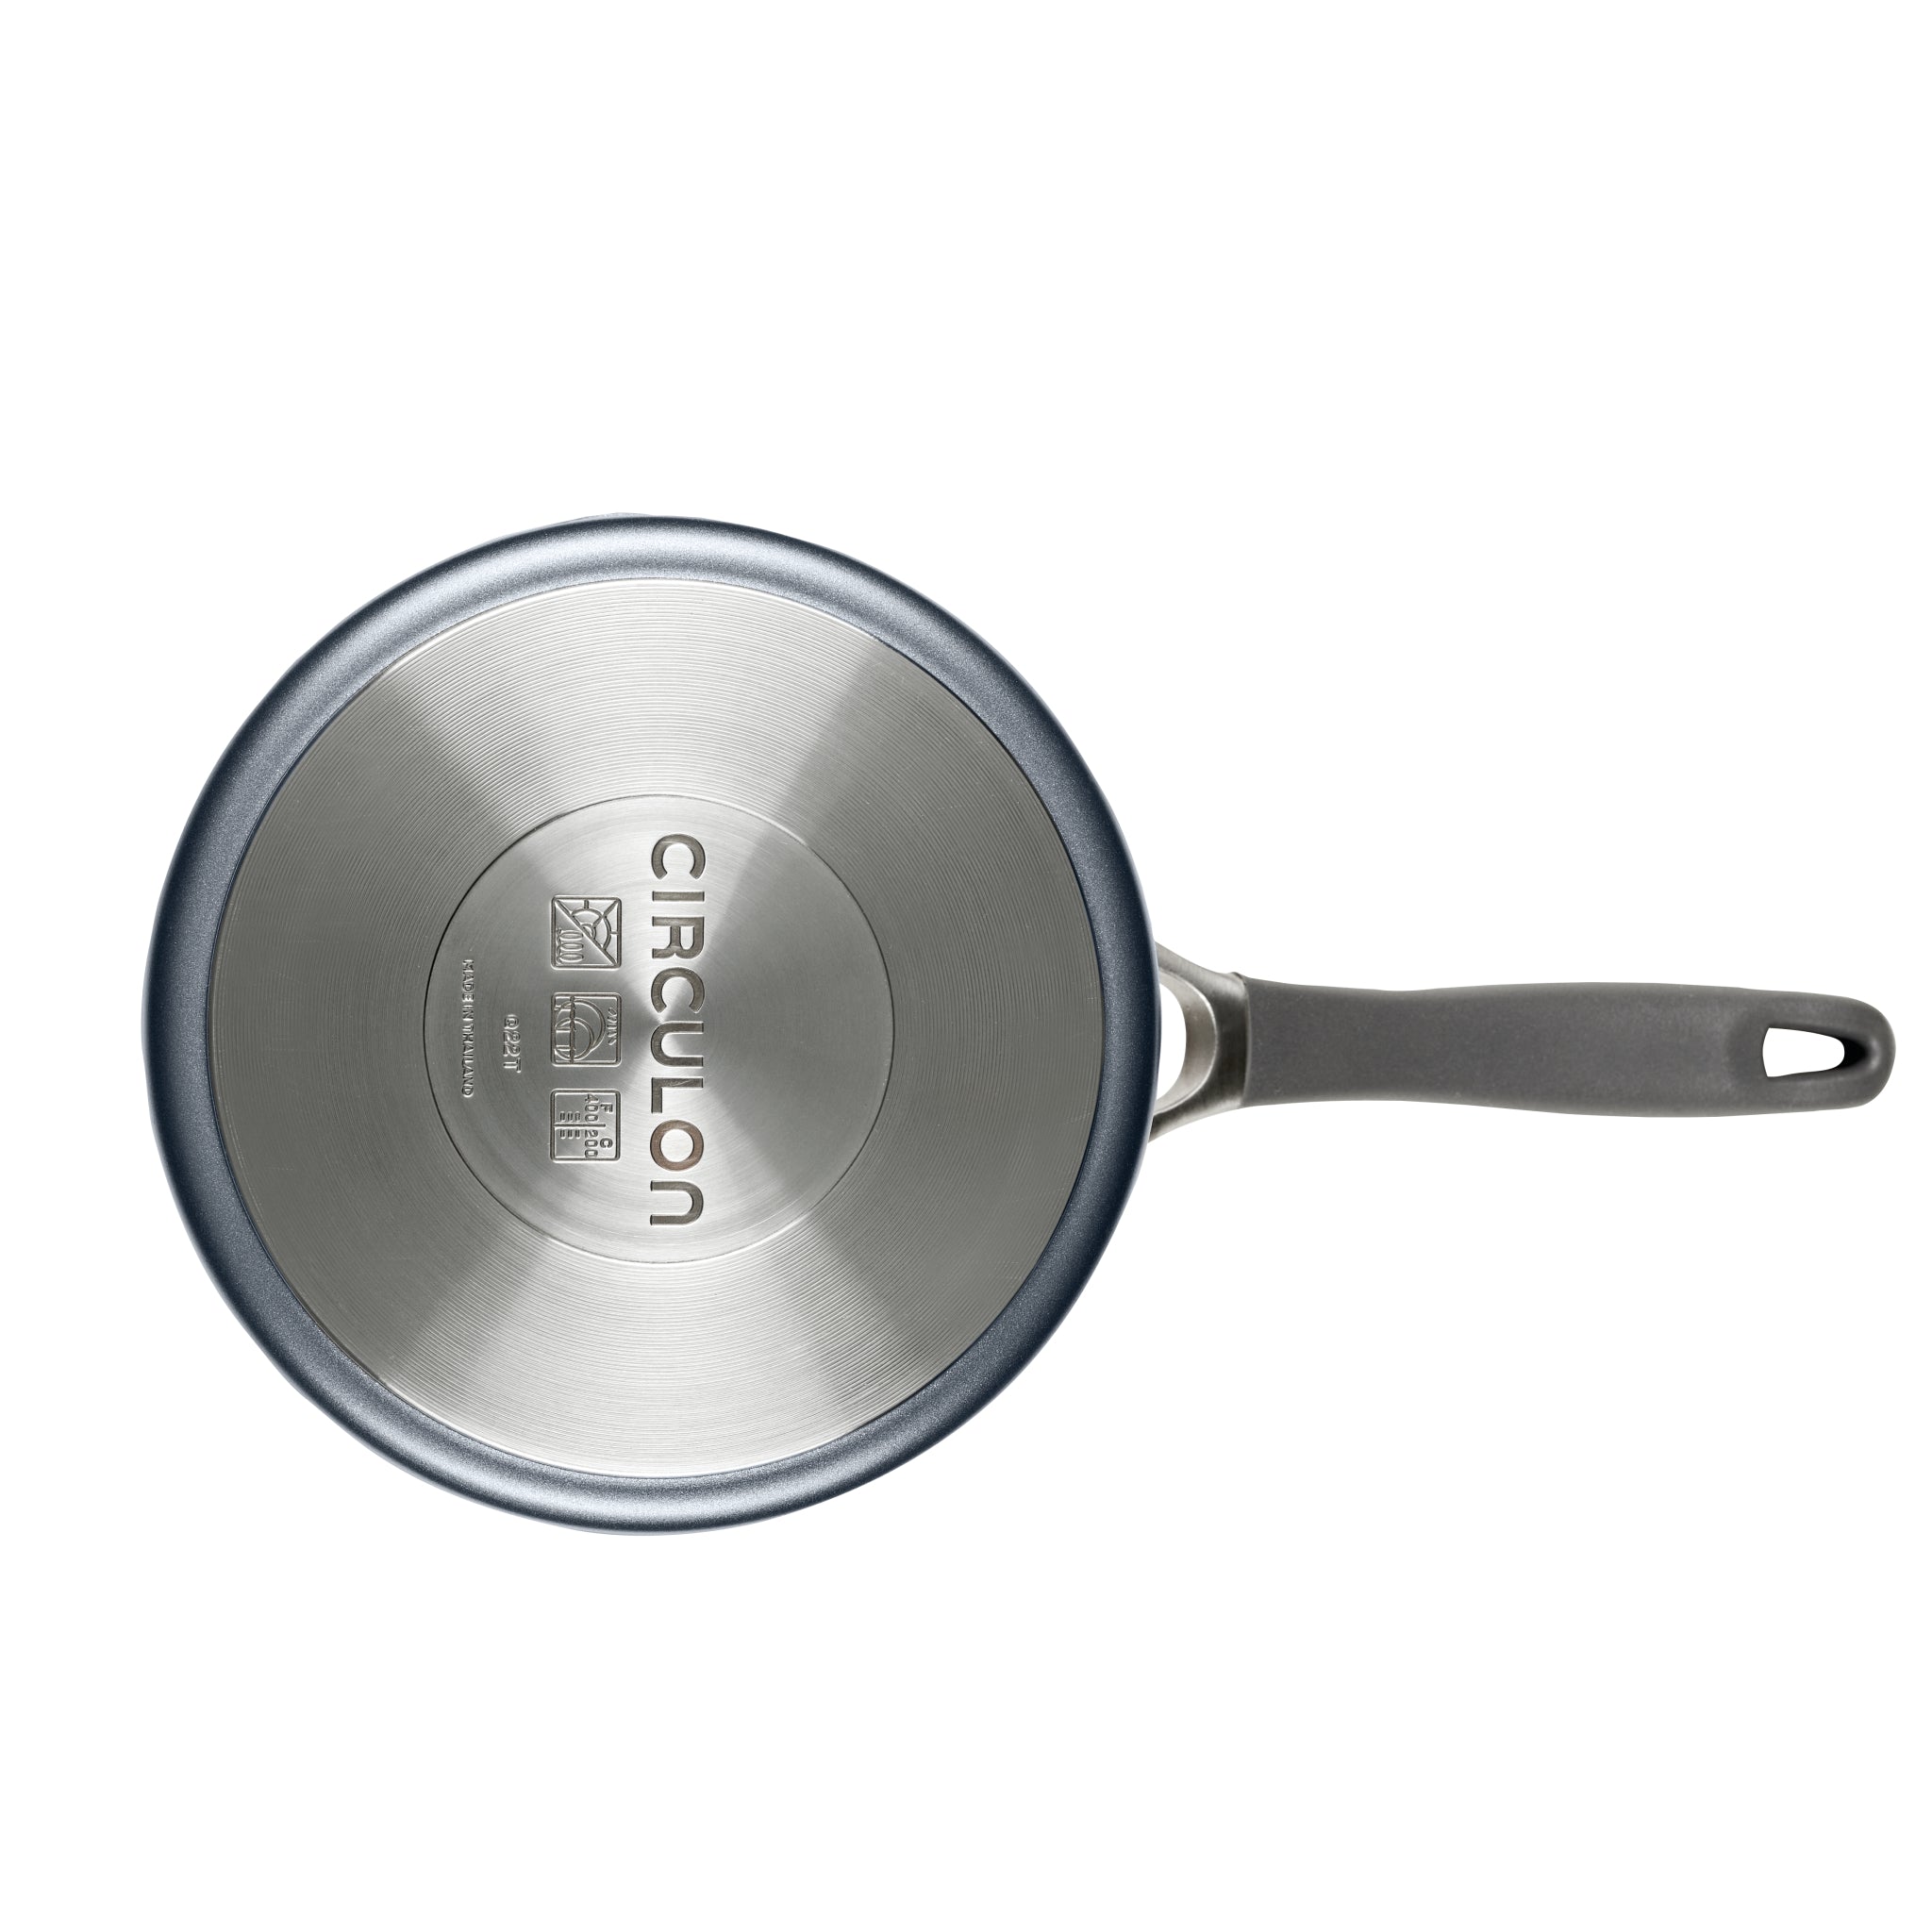  Circulon A1 Series with ScratchDefense Technology Nonstick  Induction Frying Pan/Skillet, 10 Inch, Graphite: Home & Kitchen